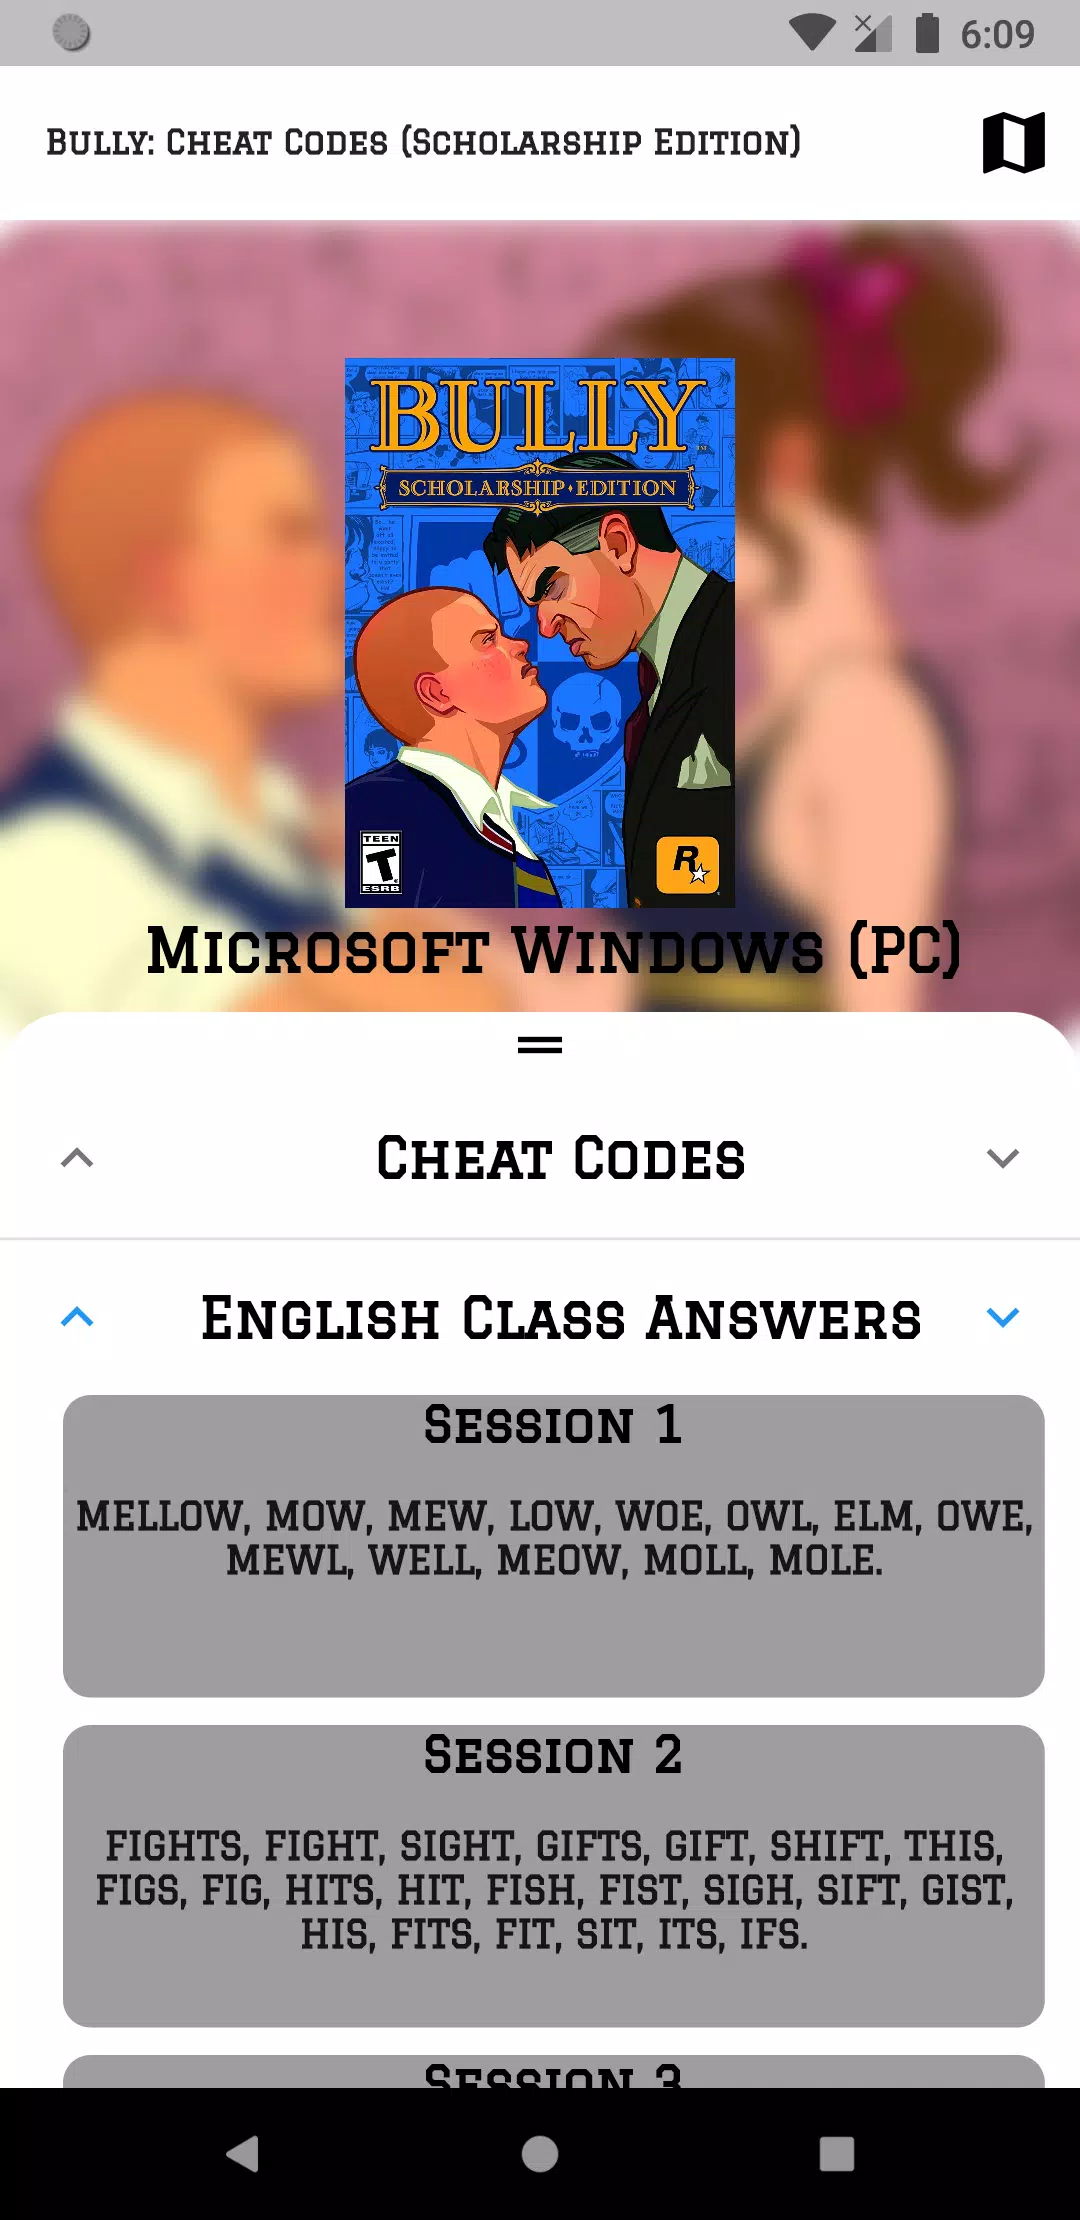 Bully: Cheat Codes - Scholarship Edition APK for Android Download